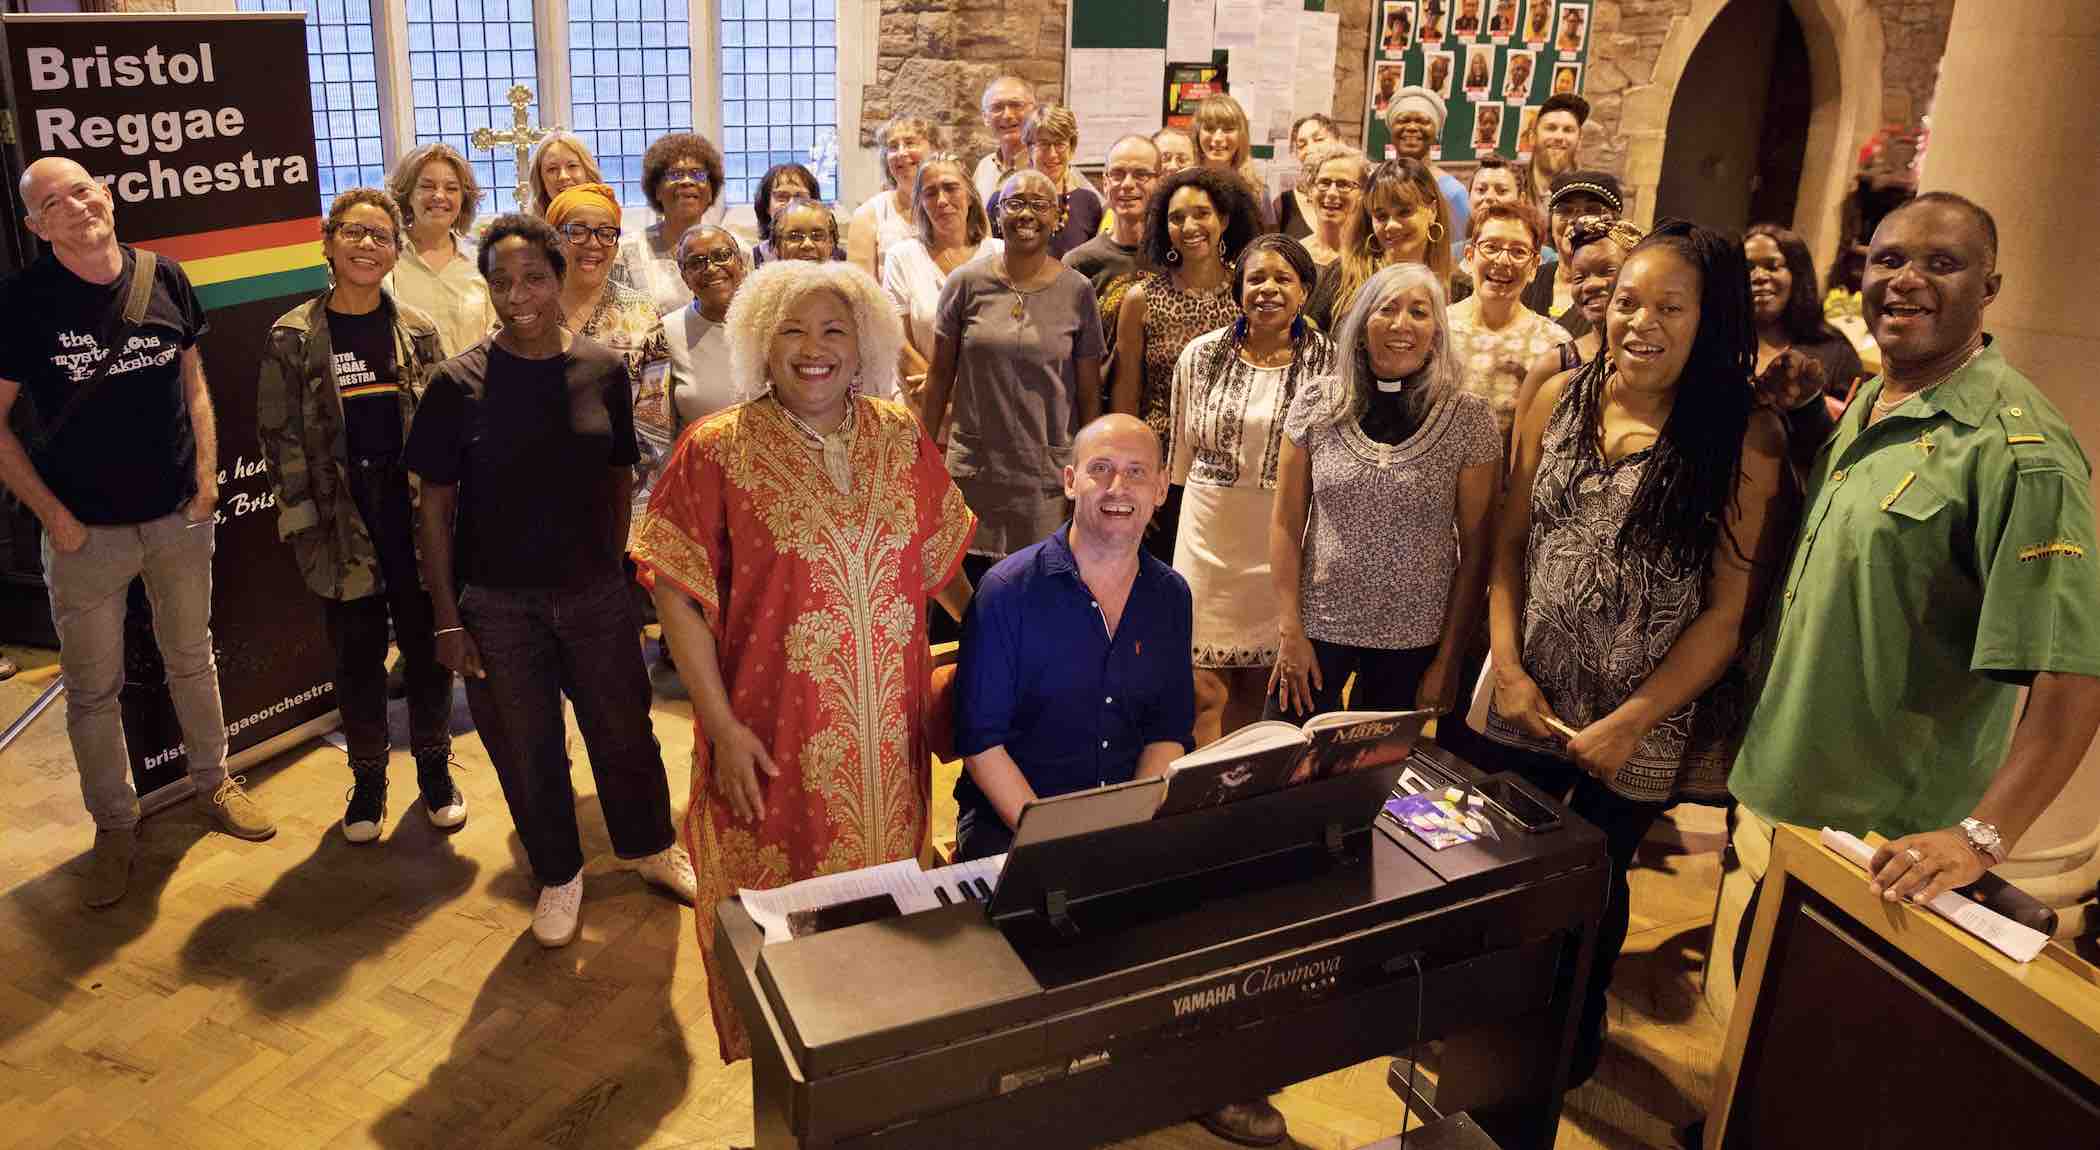 PRESS RELEASE: Bristol Reggae Orchestra and Windrush Choir to open the Pyramid stage at Glastonbury Festival celebrating the 75th Anniversary of Windrush